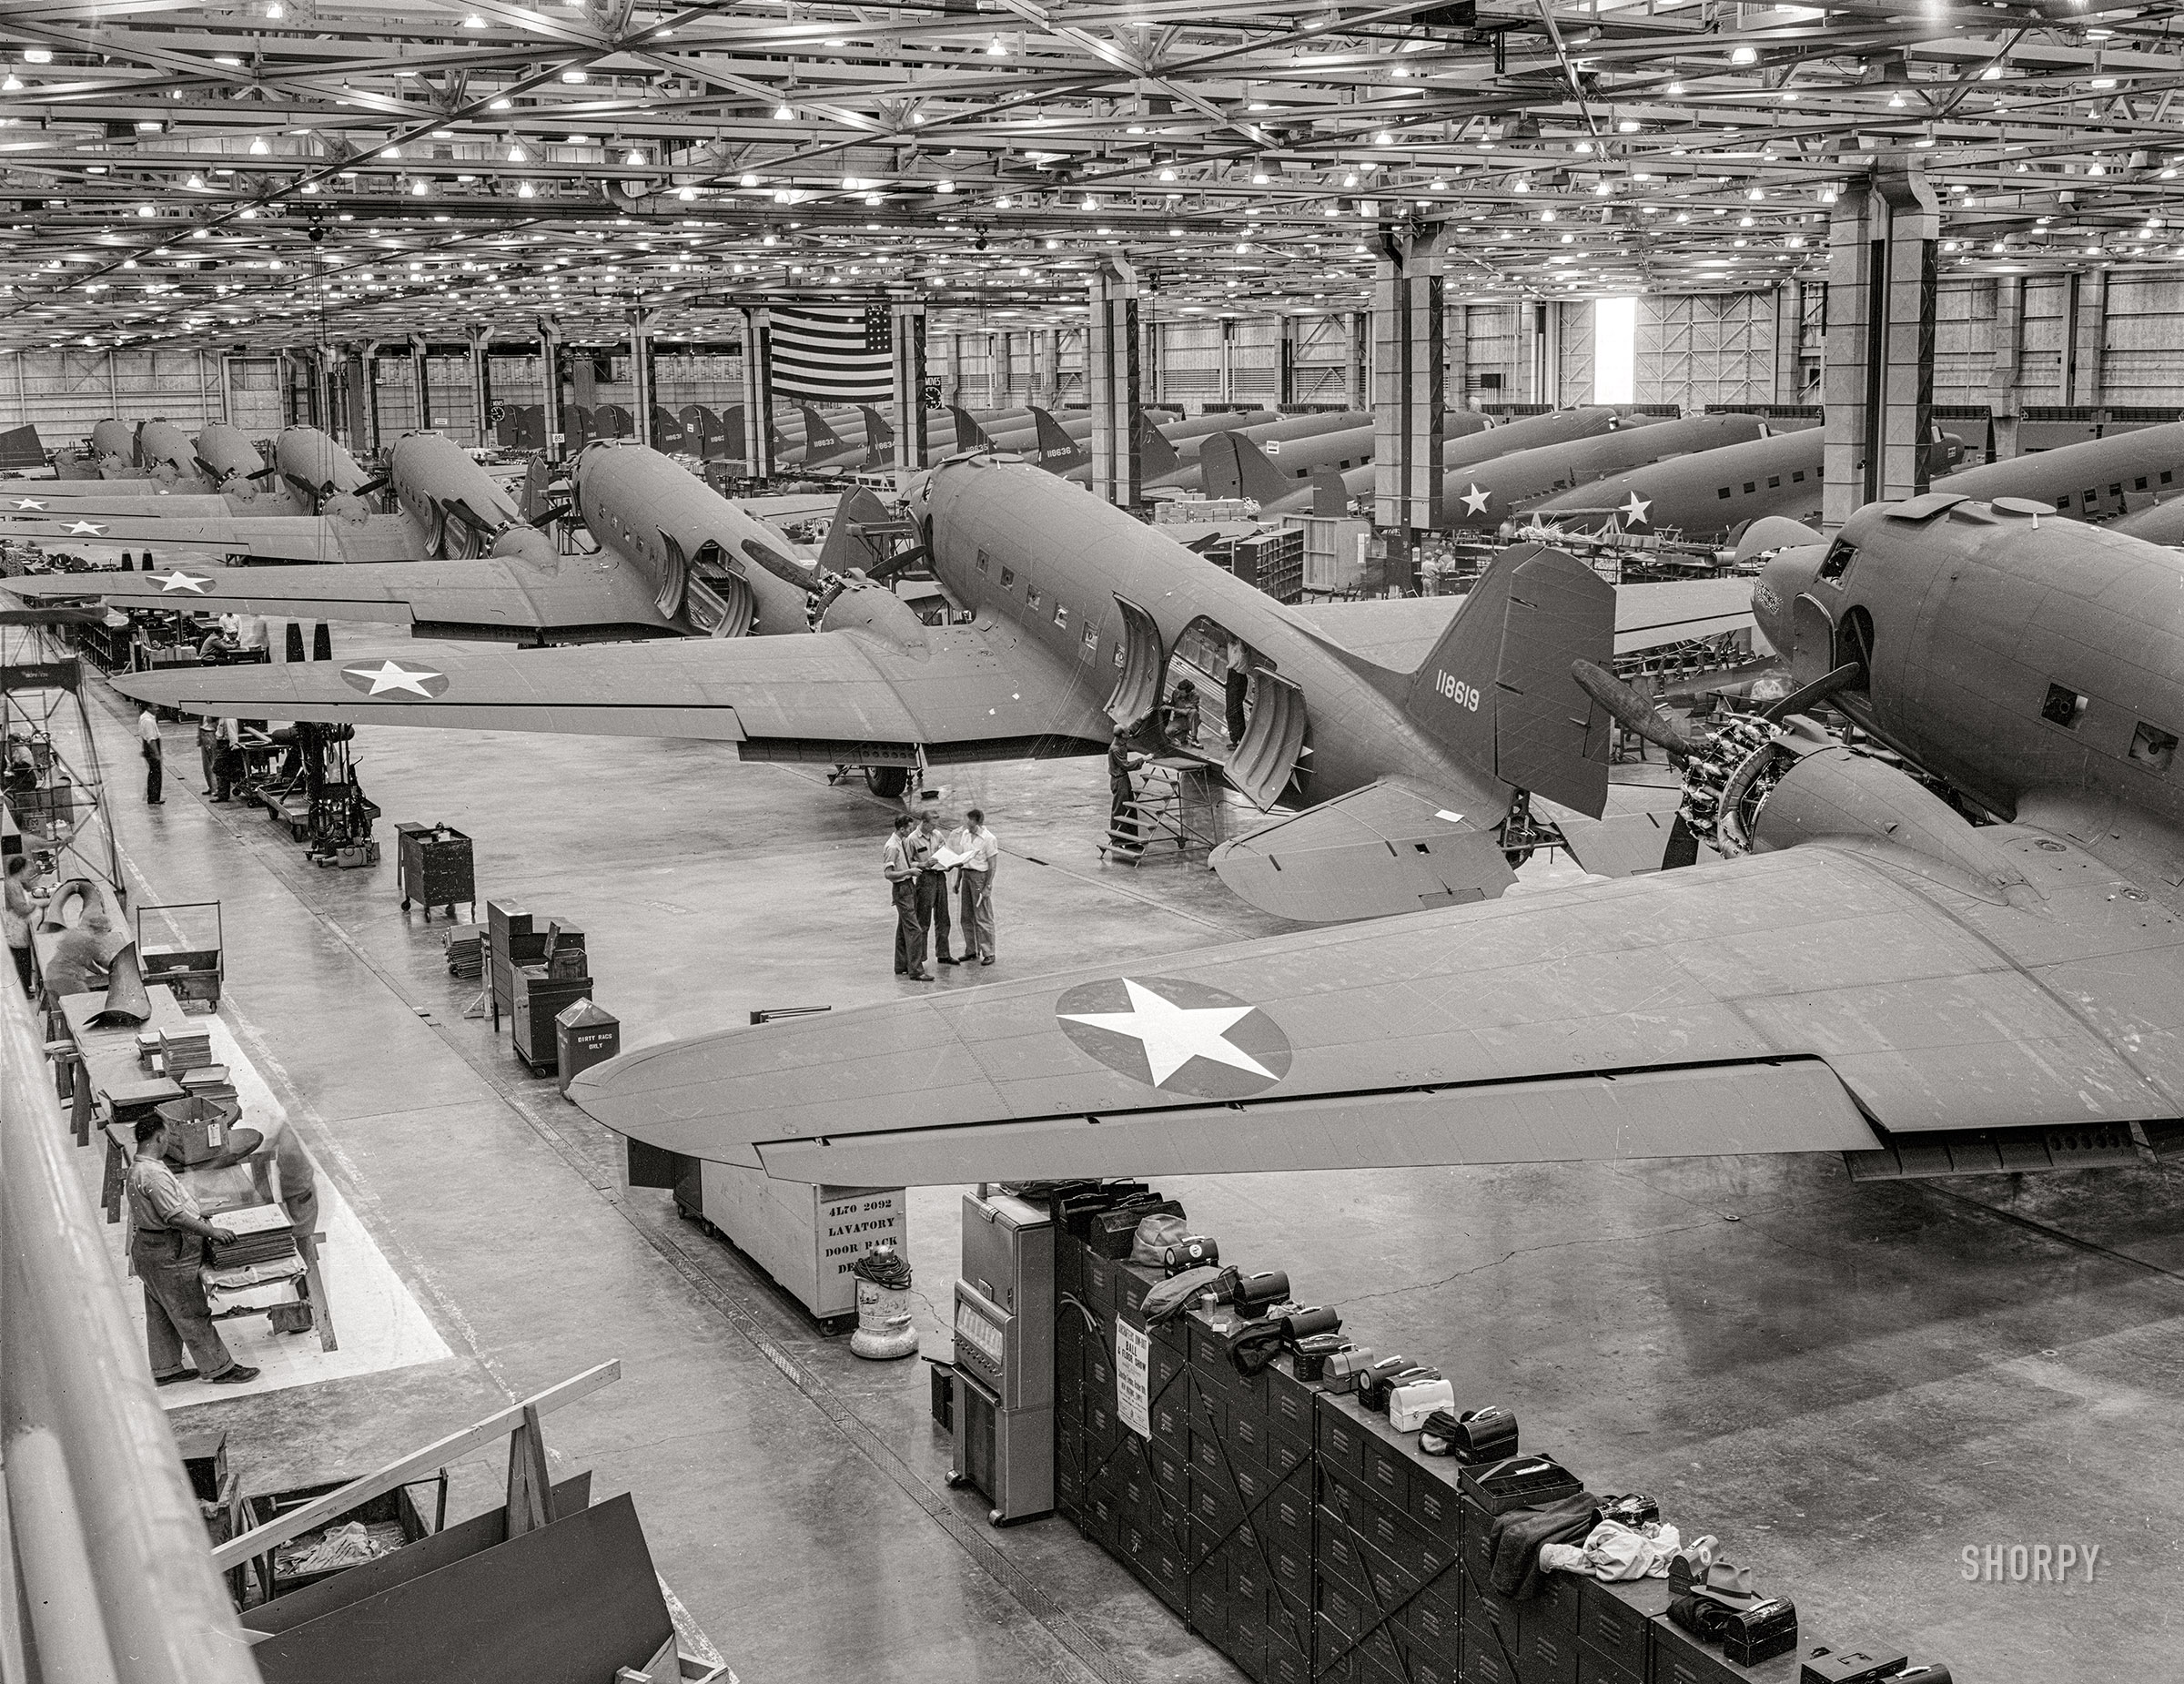 October 1942. "Great numbers of C-47 transport planes move along the assembly lines at the Douglas Aircraft Company plant at Long Beach, California. The versatile C-47 performs many important tasks for the Army. It ferries men and cargo across oceans and mountains, tows gliders and brings paratroopers and their equipment to scenes of action." 4x5 inch acetate negative by Alfred Palmer for the Office of War Information. View full size.